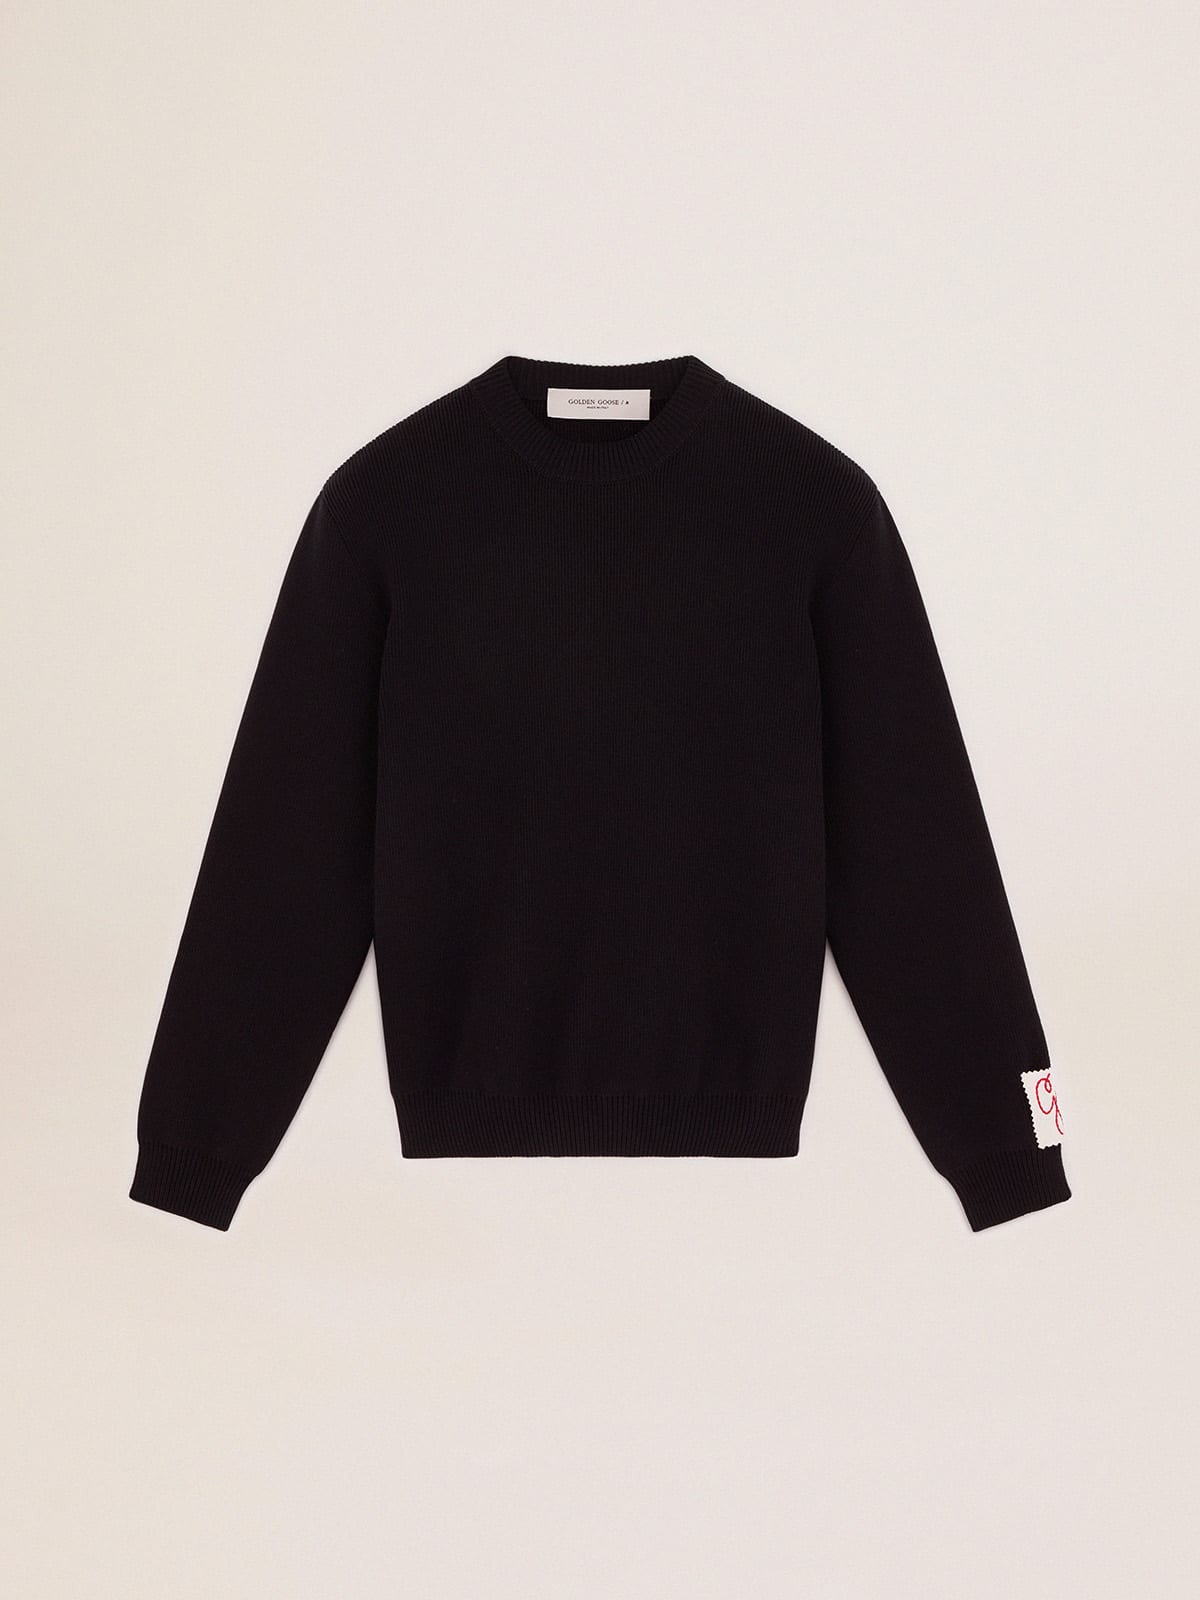 Men's round-neck sweater in dark blue cotton with logo on the back